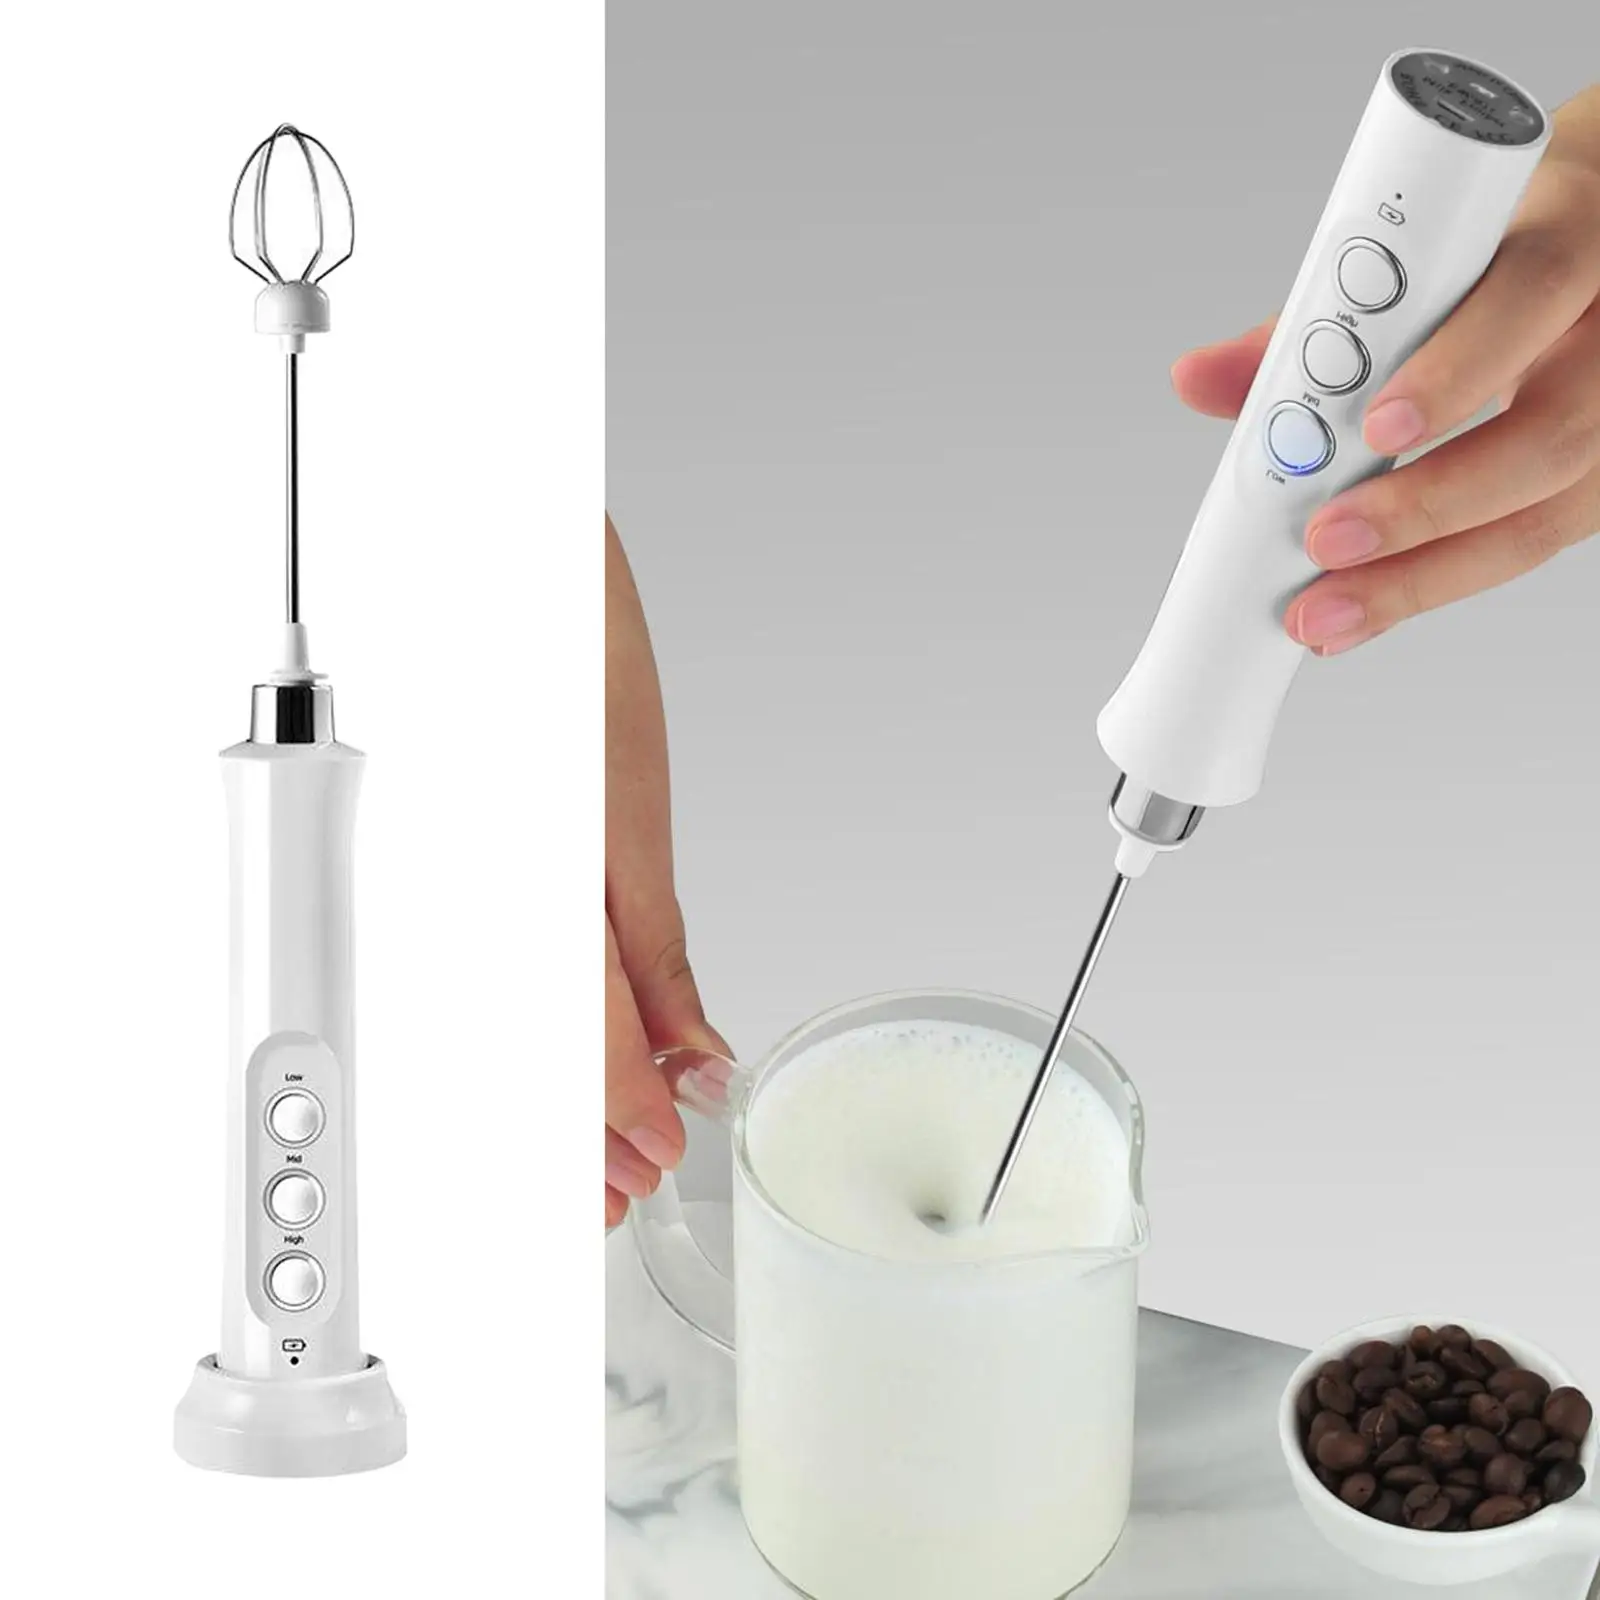 USB Rechargeable Mini Milk Frother Egg Beater Mixer Blender Beverage Mixer Tool